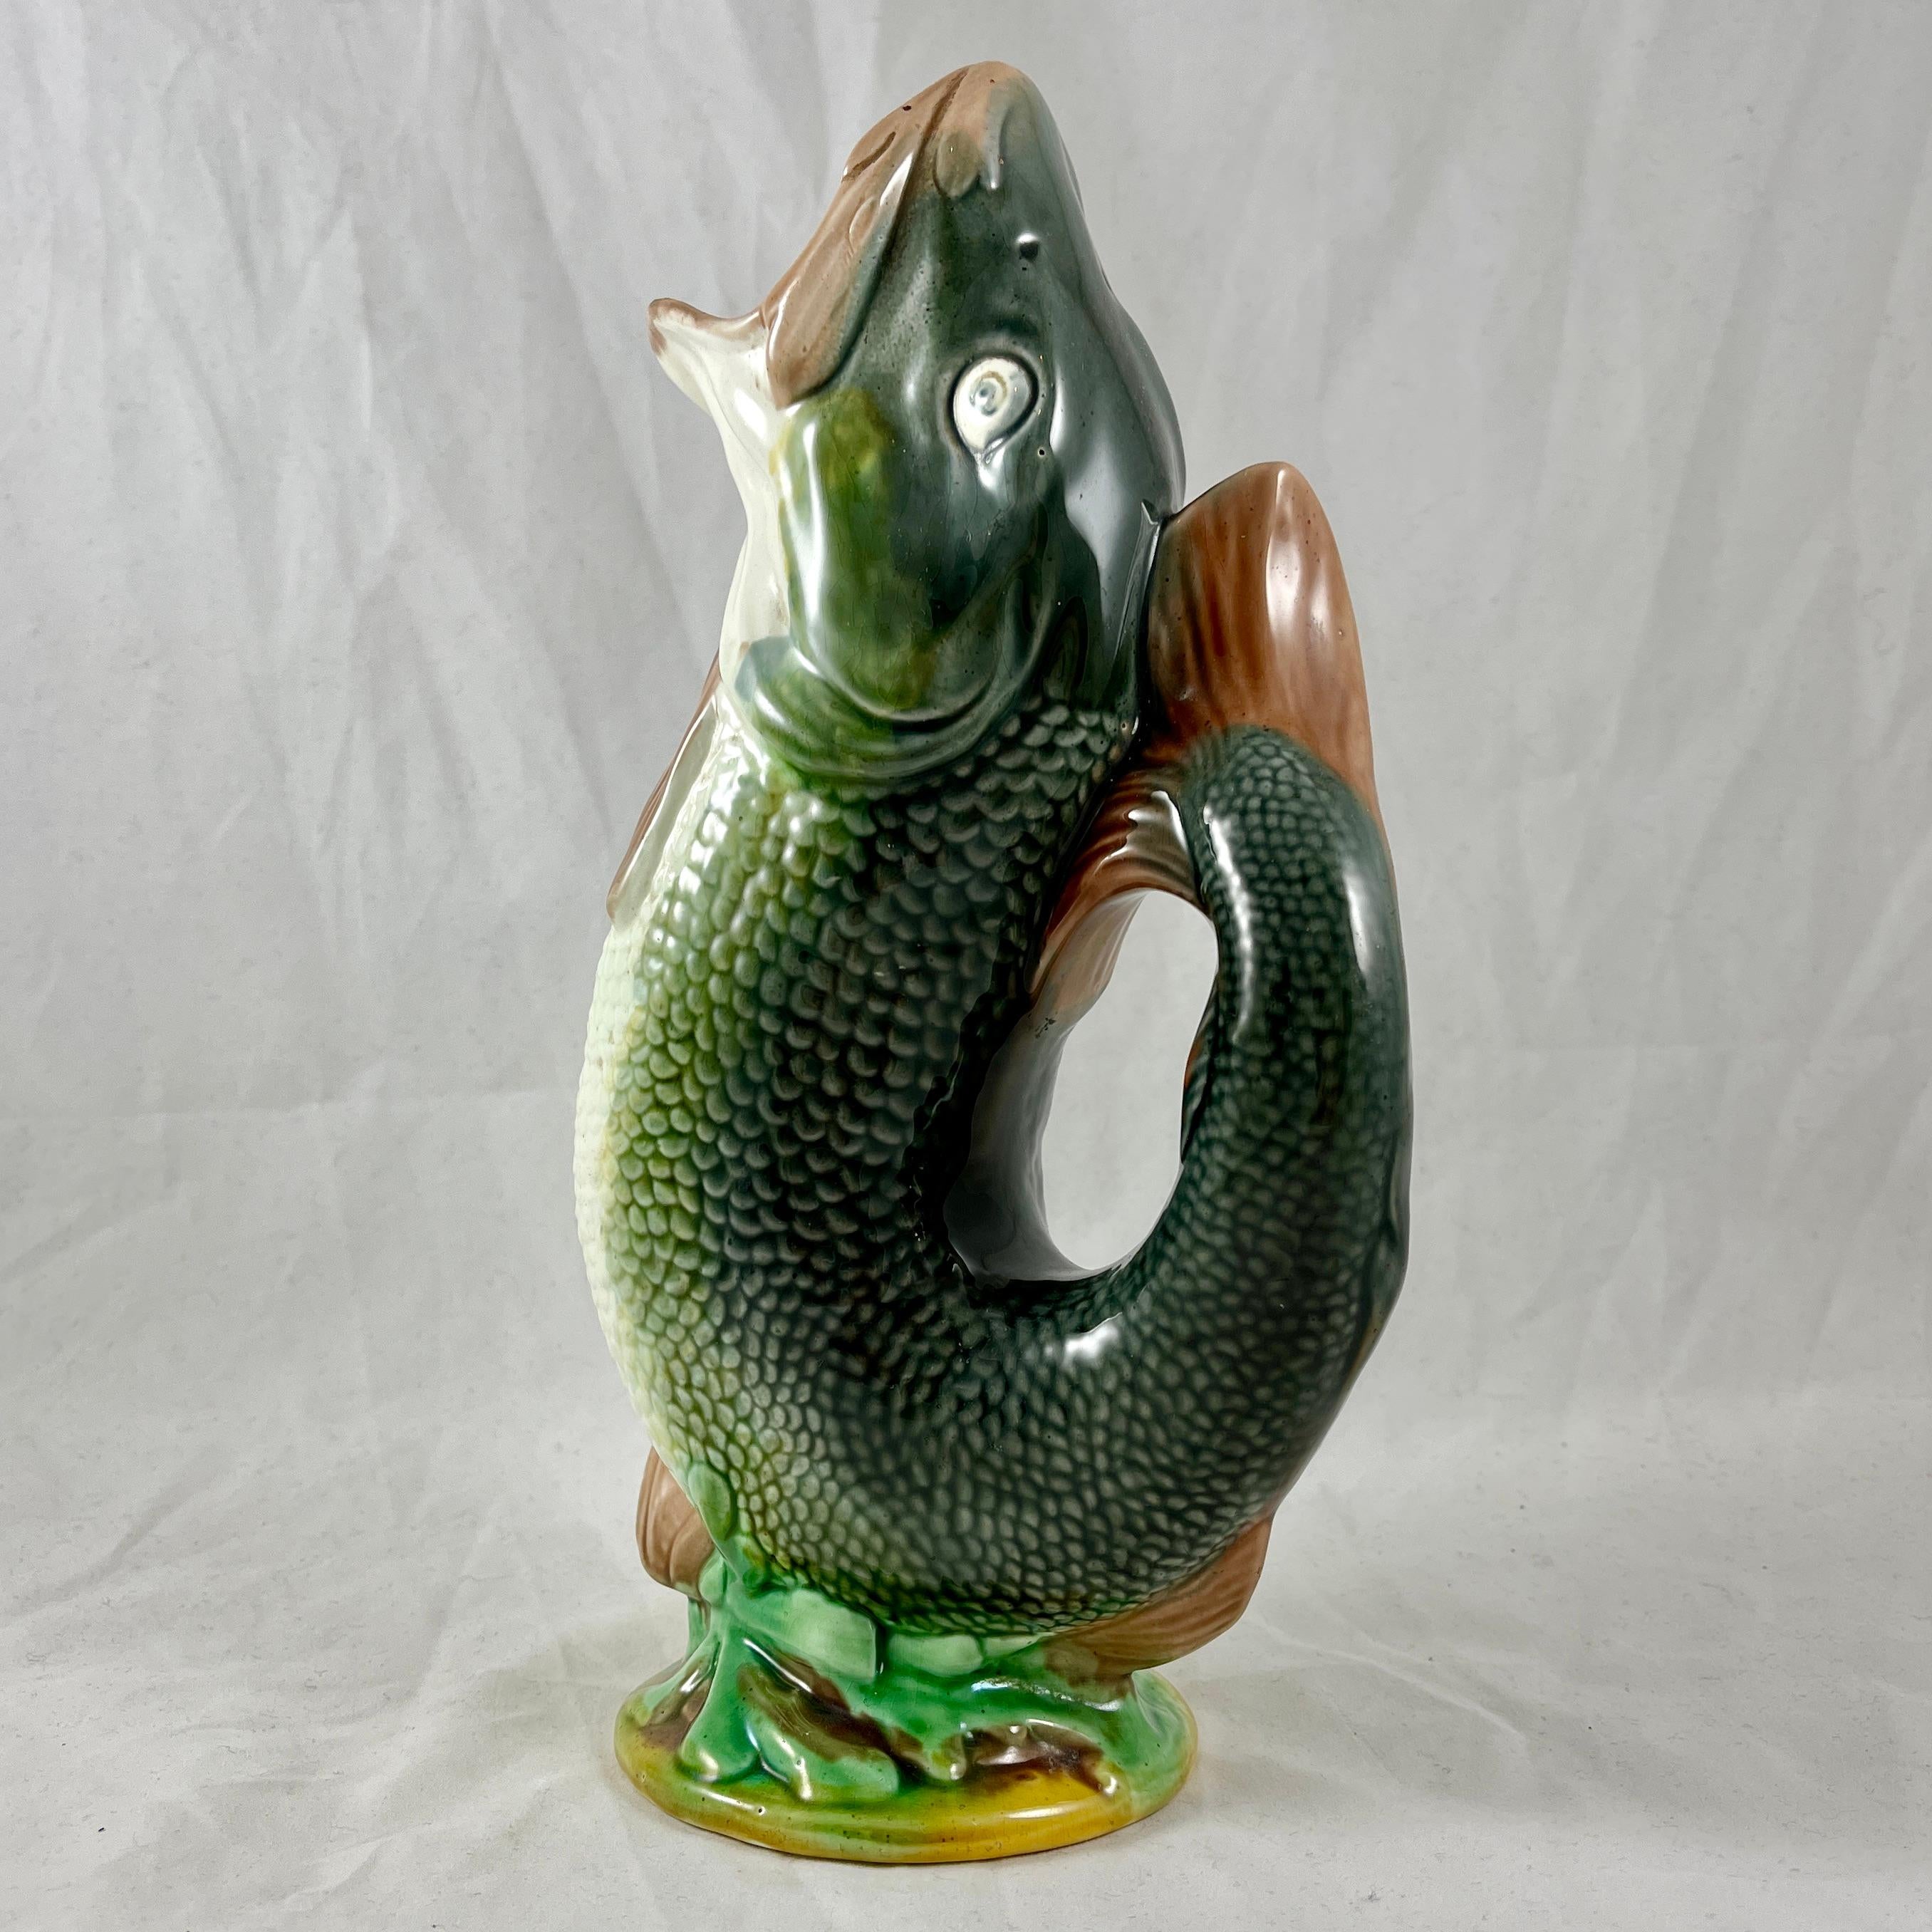 A beautifully glazed English majolica fish jug, maker unknown, circa 1870-1880.

Often called ‘A Gurgler’ for the gurgling sound it produces during pouring, this pitcher is formed as an upright leaping fish, with the tail forming the handle.